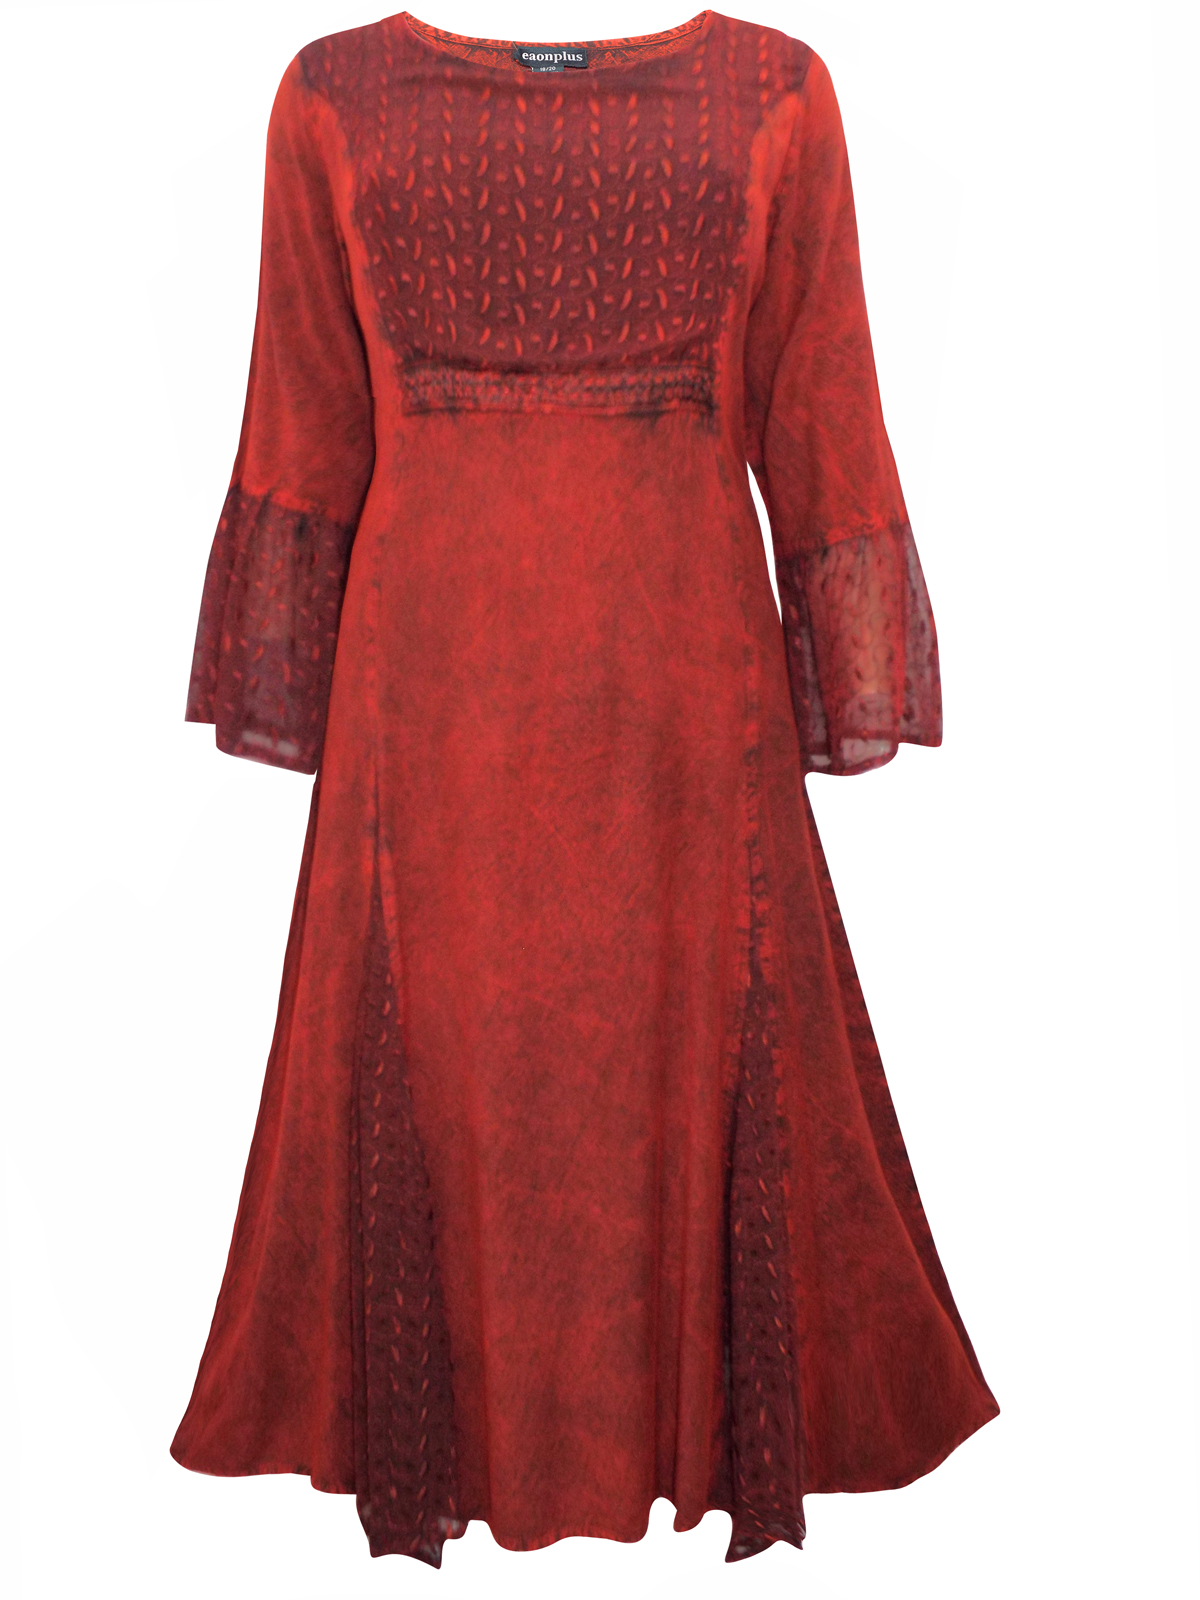 eaonplus ANTIQUE-RED Embroidered Panelled Bell Sleeve Dress - Plus Size ...